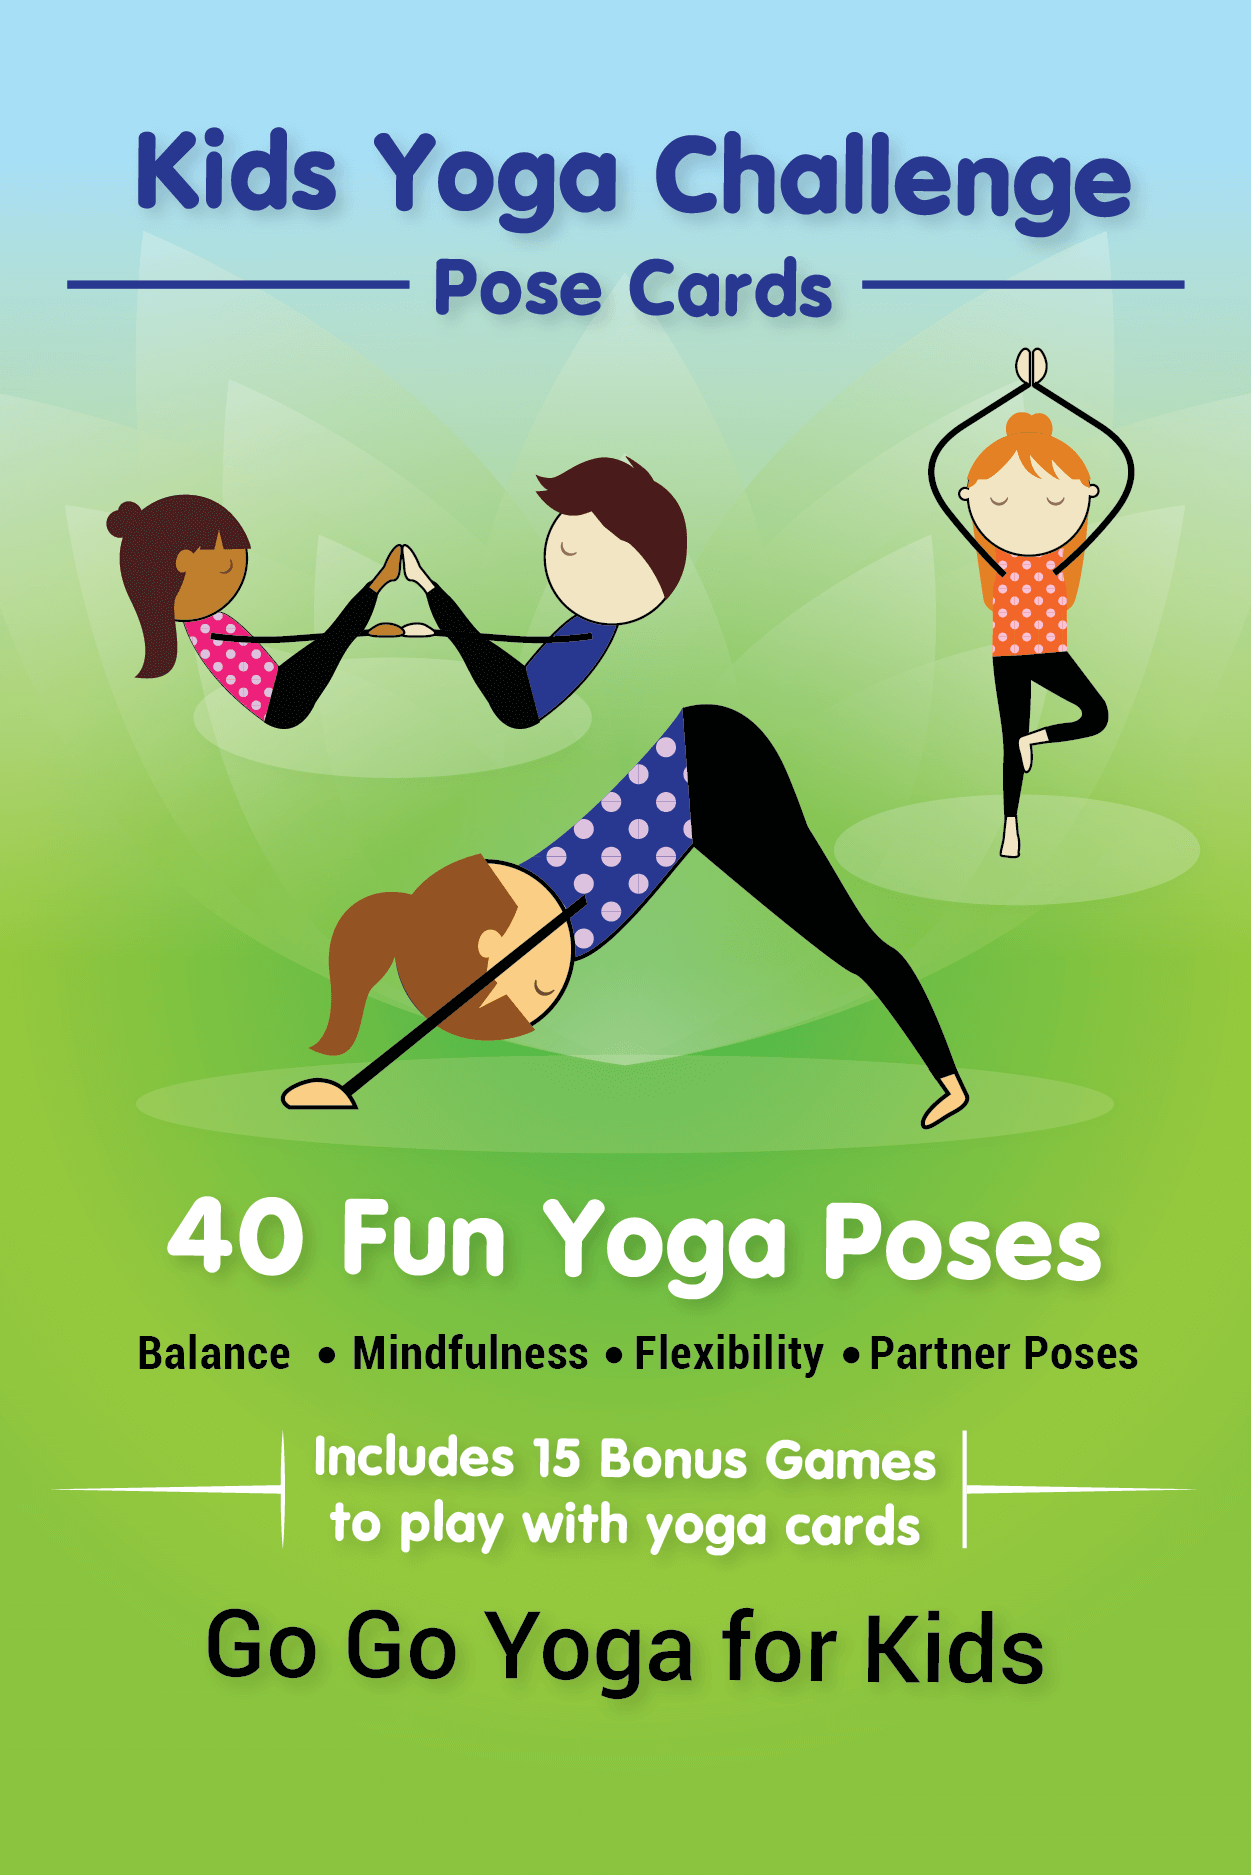 Let's Play with Yoga!